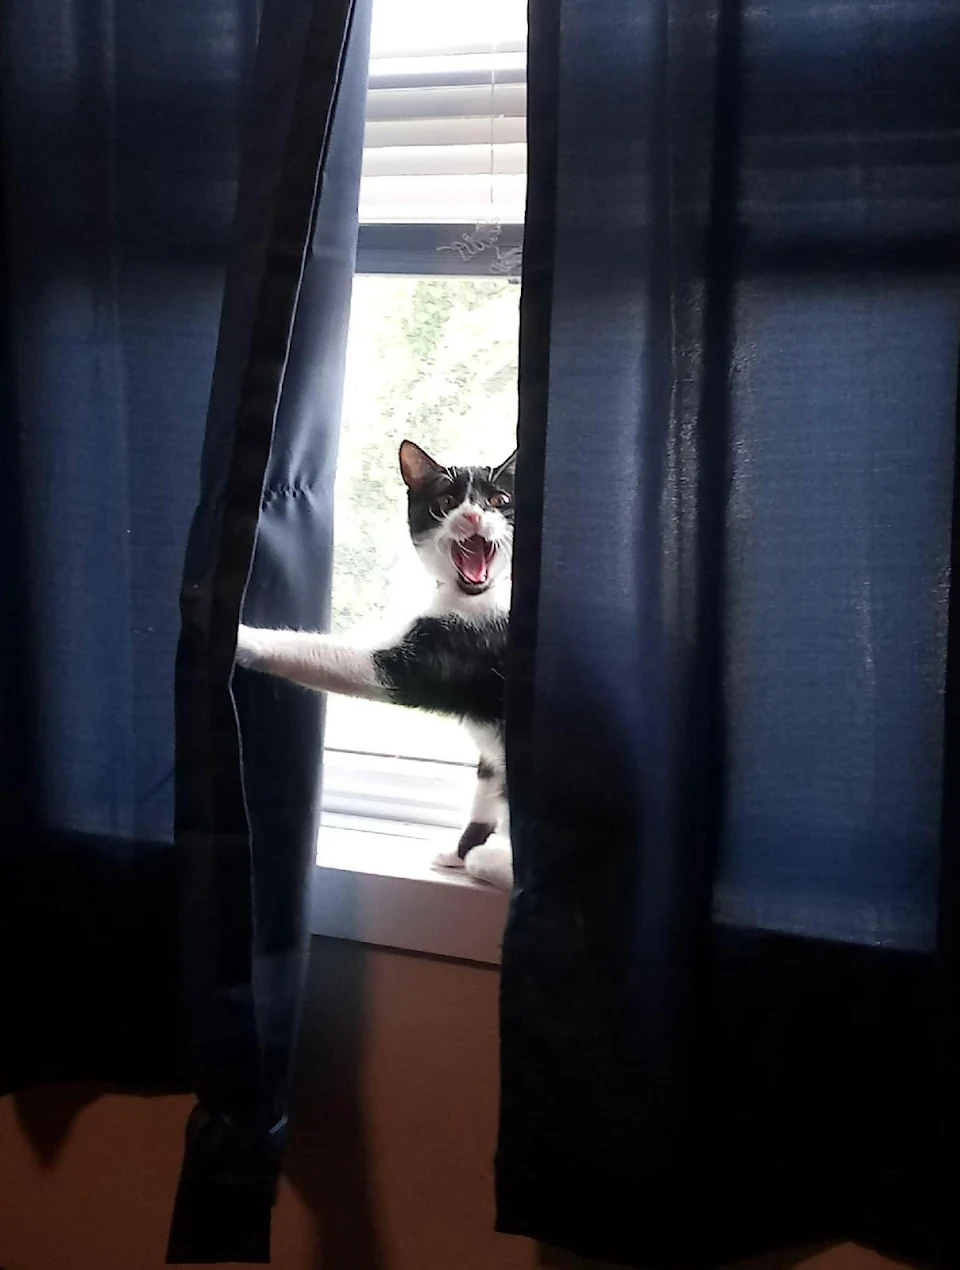 This cat in the window